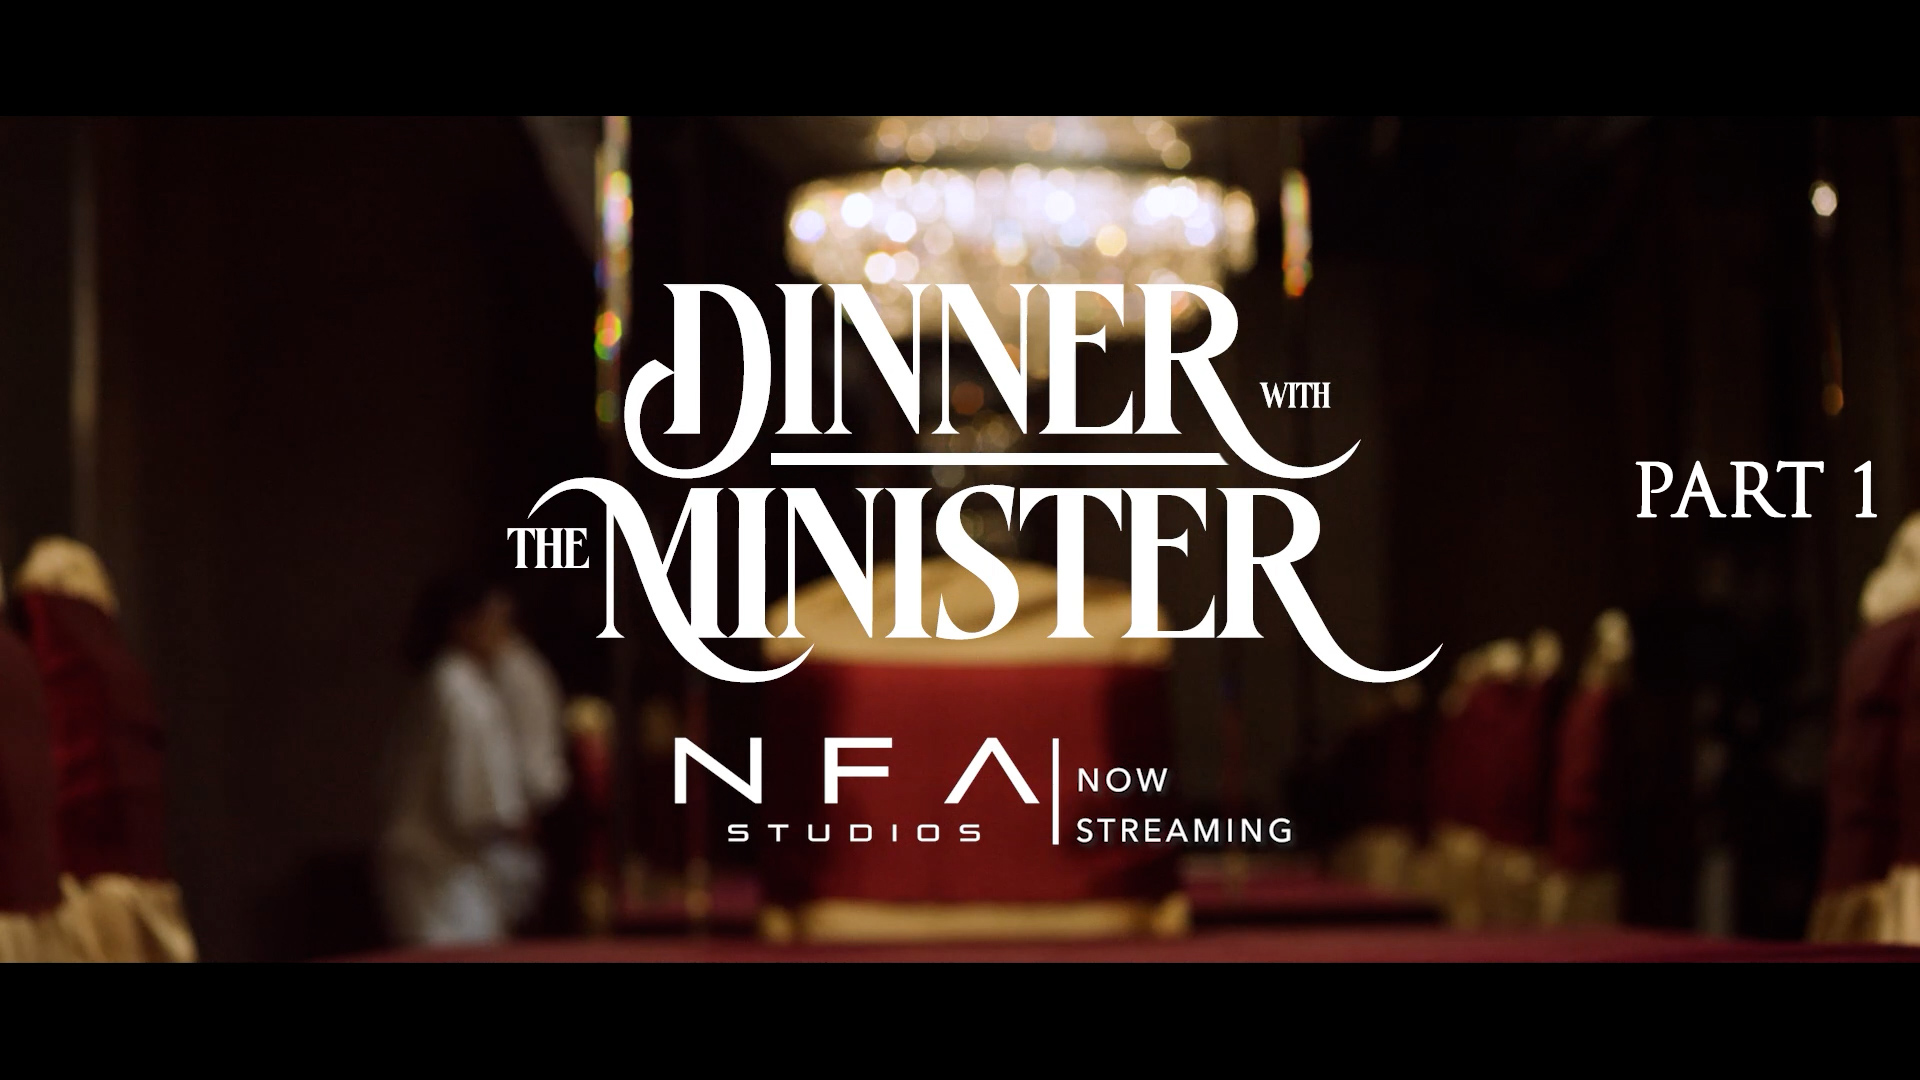 Part 1: NFA Studios presents Dinner with The Minister